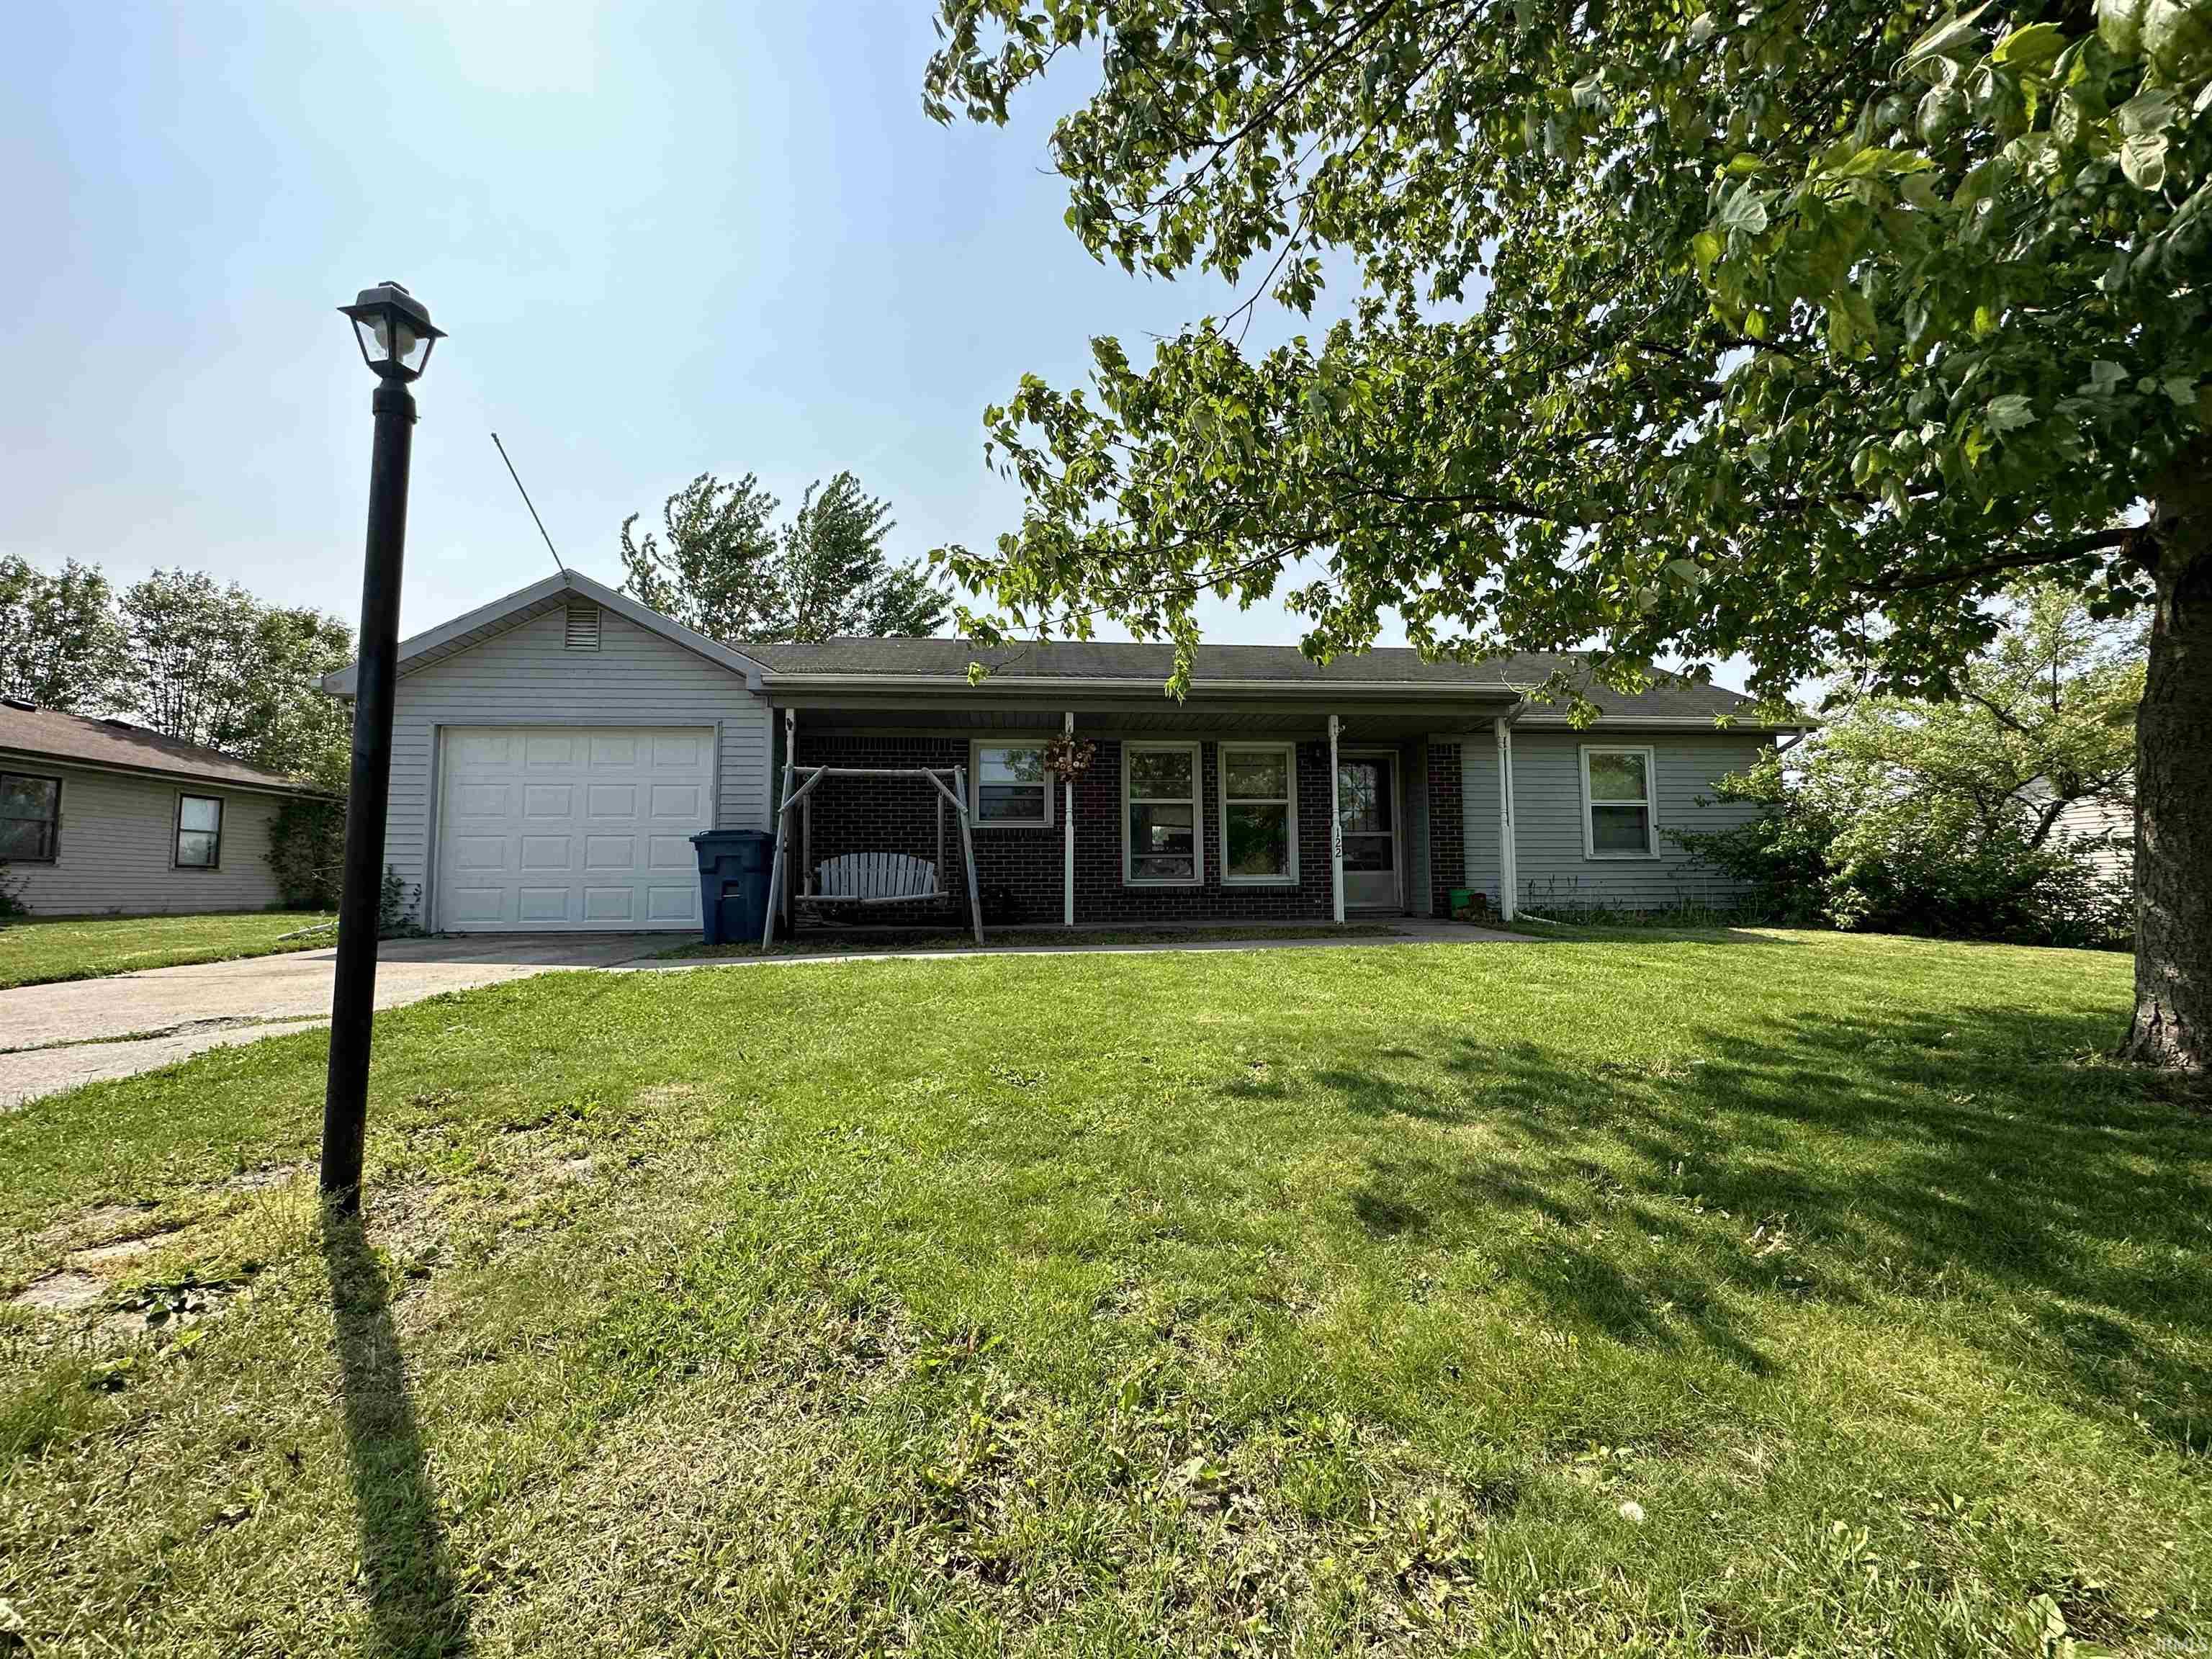 122 Quayle, Decatur, Indiana 46733, 3 Bedrooms Bedrooms, 6 Rooms Rooms,1 BathroomBathrooms,Residential,For Sale,Quayle,202316124